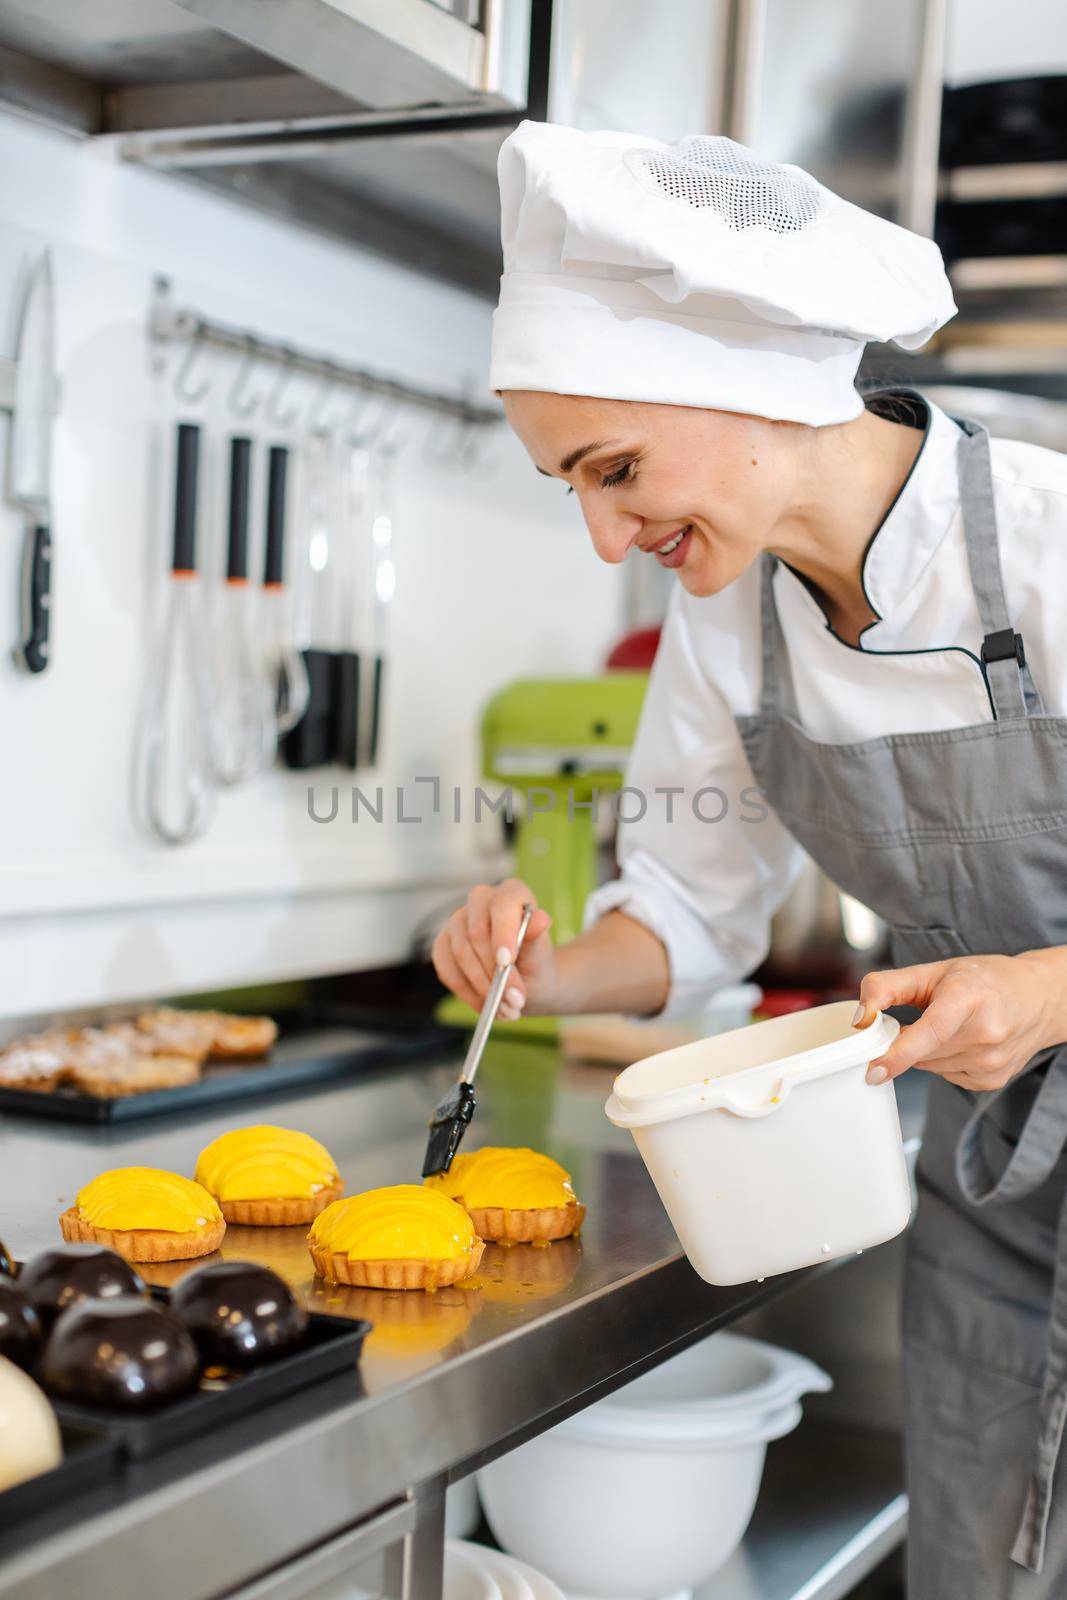 Confectioner working on sweet little cakes by Kzenon